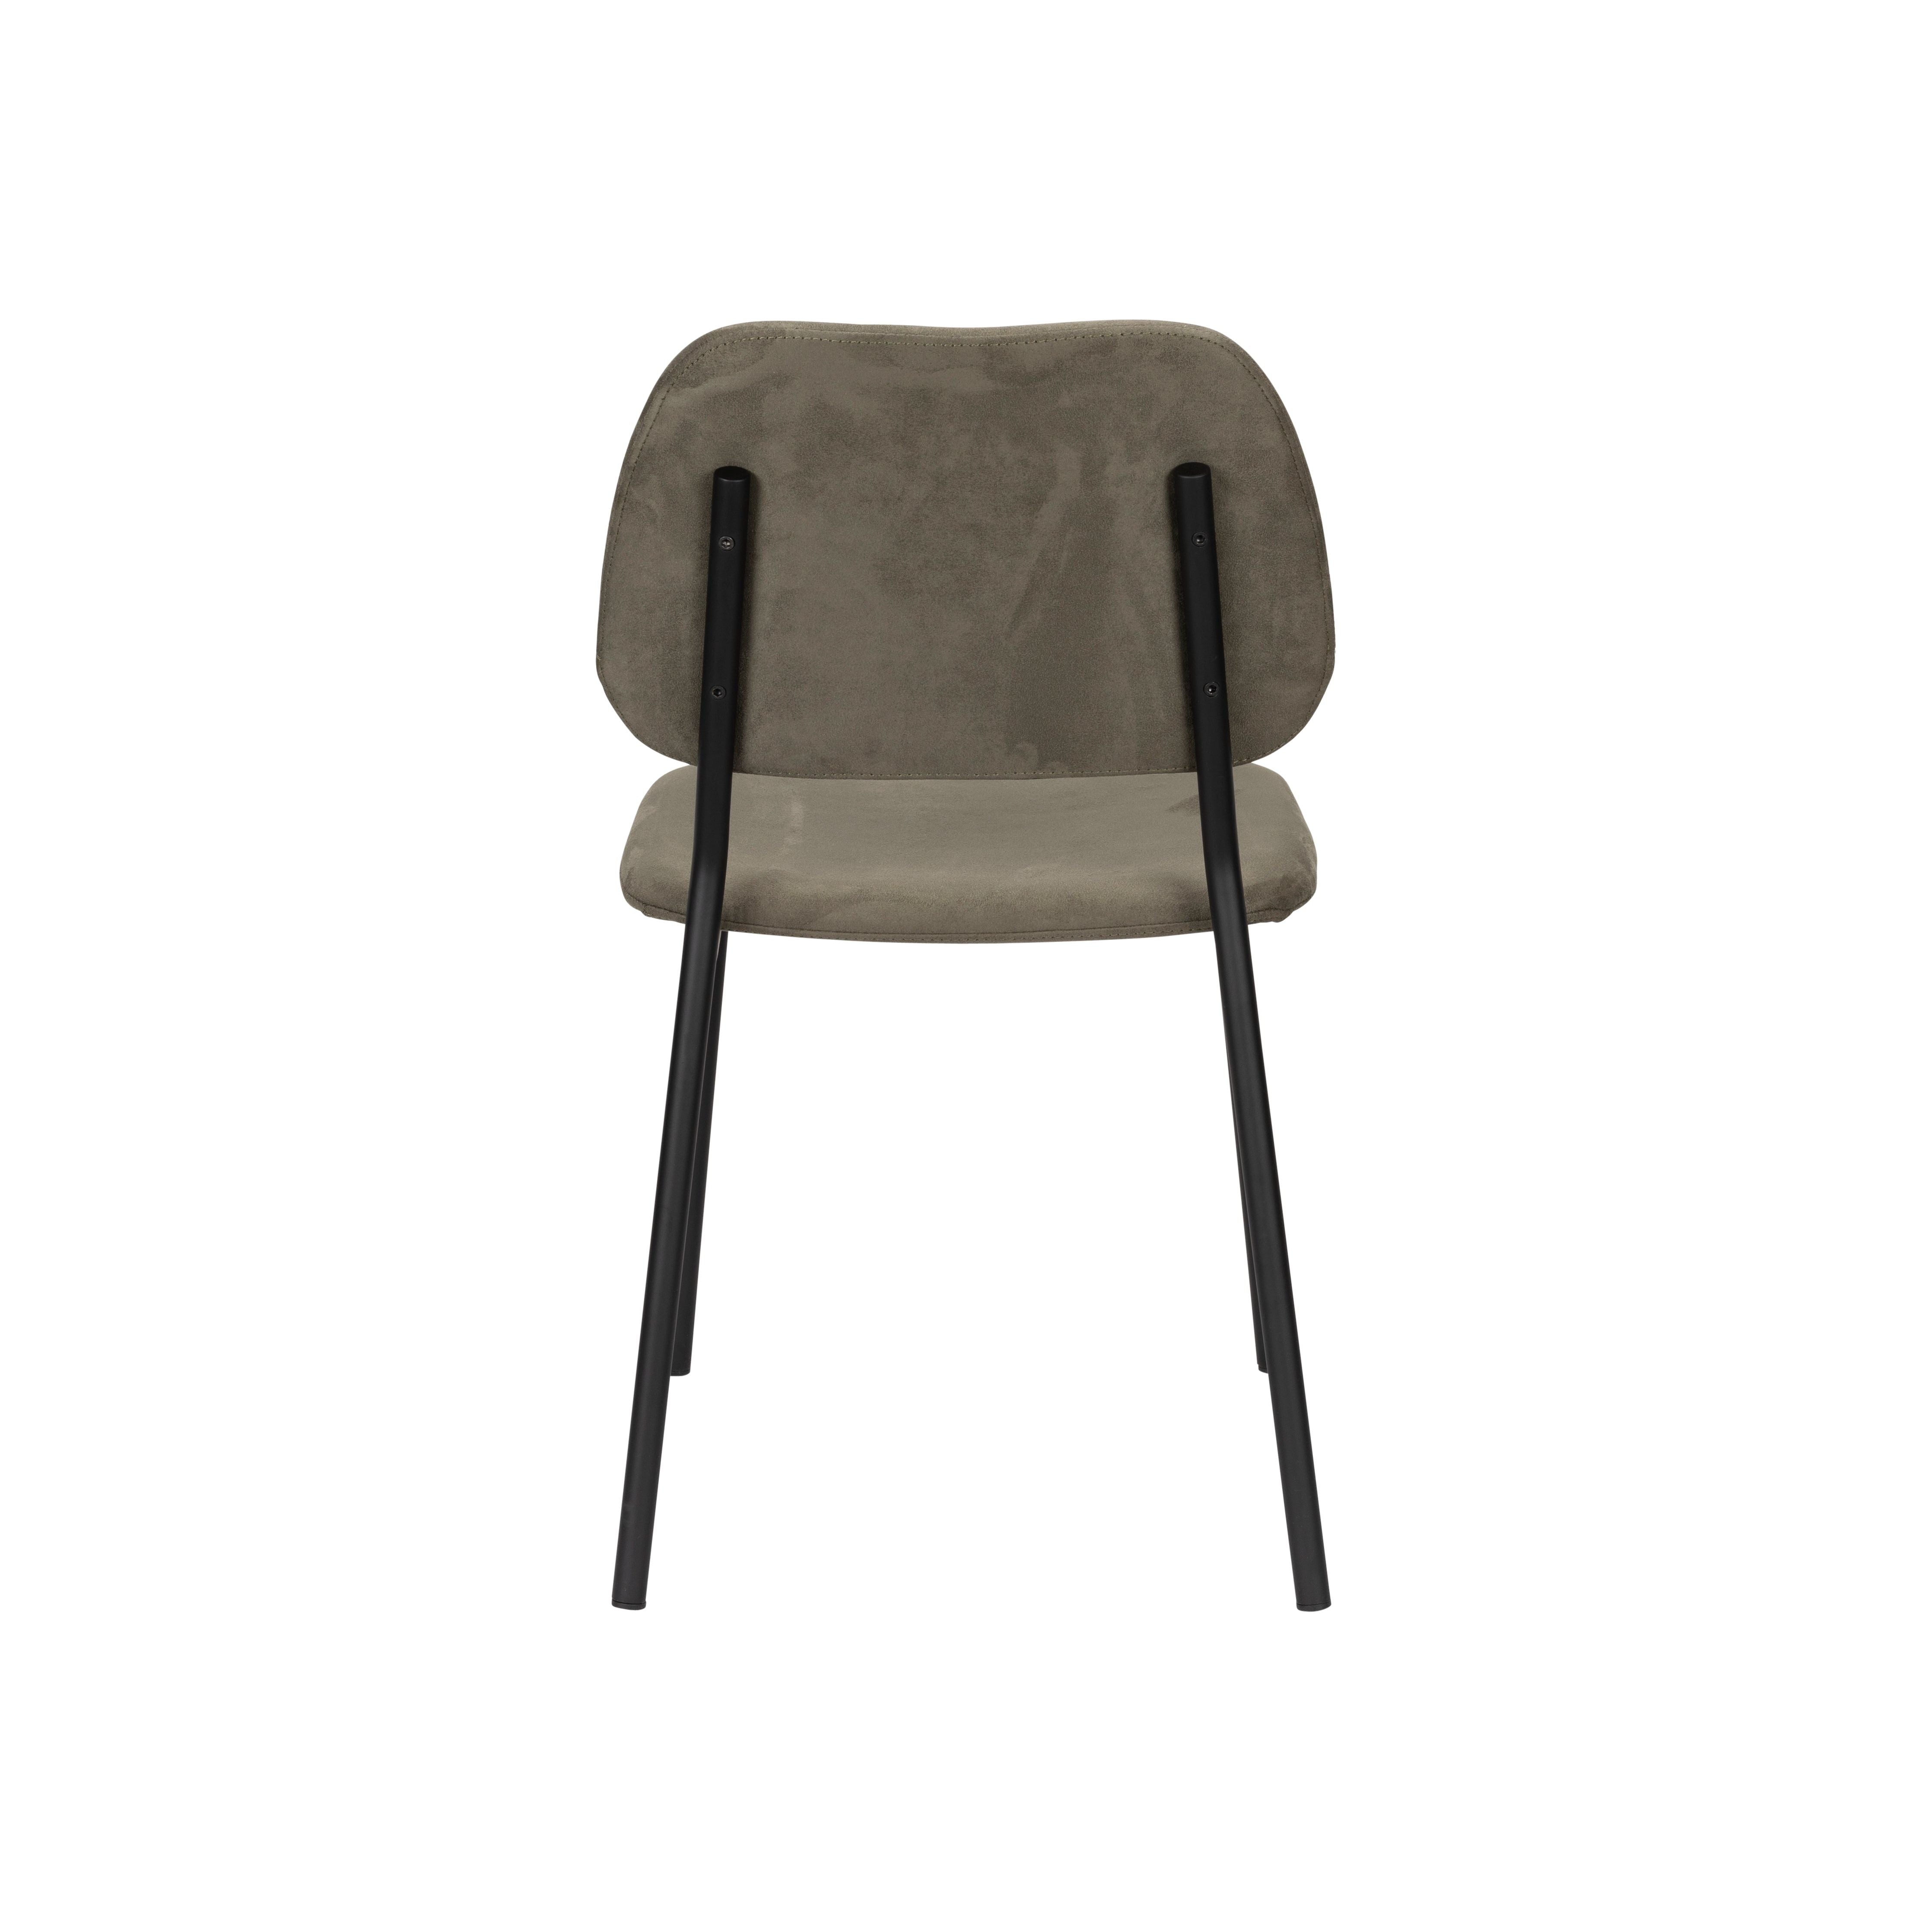 Chair darby green | 2 pieces